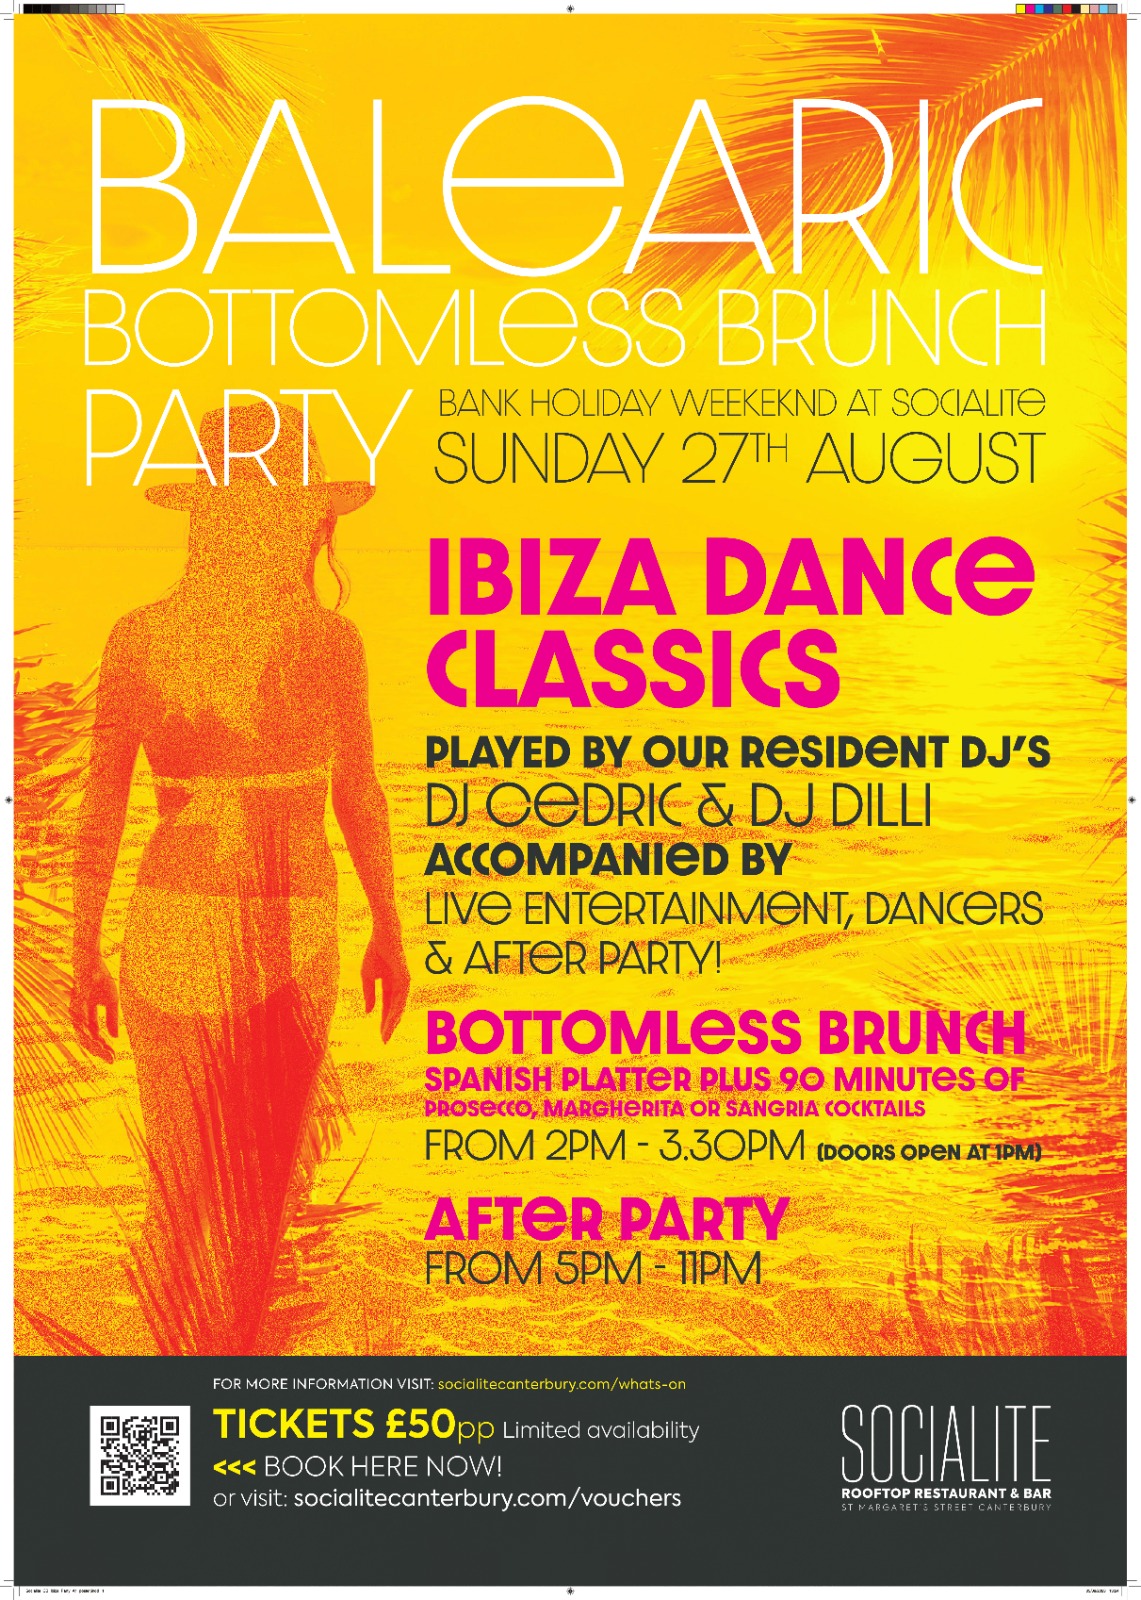 BALEARIC BOTTOMLESS BRUNCH & AFTER PARTY @ Socialite at Socialite ...